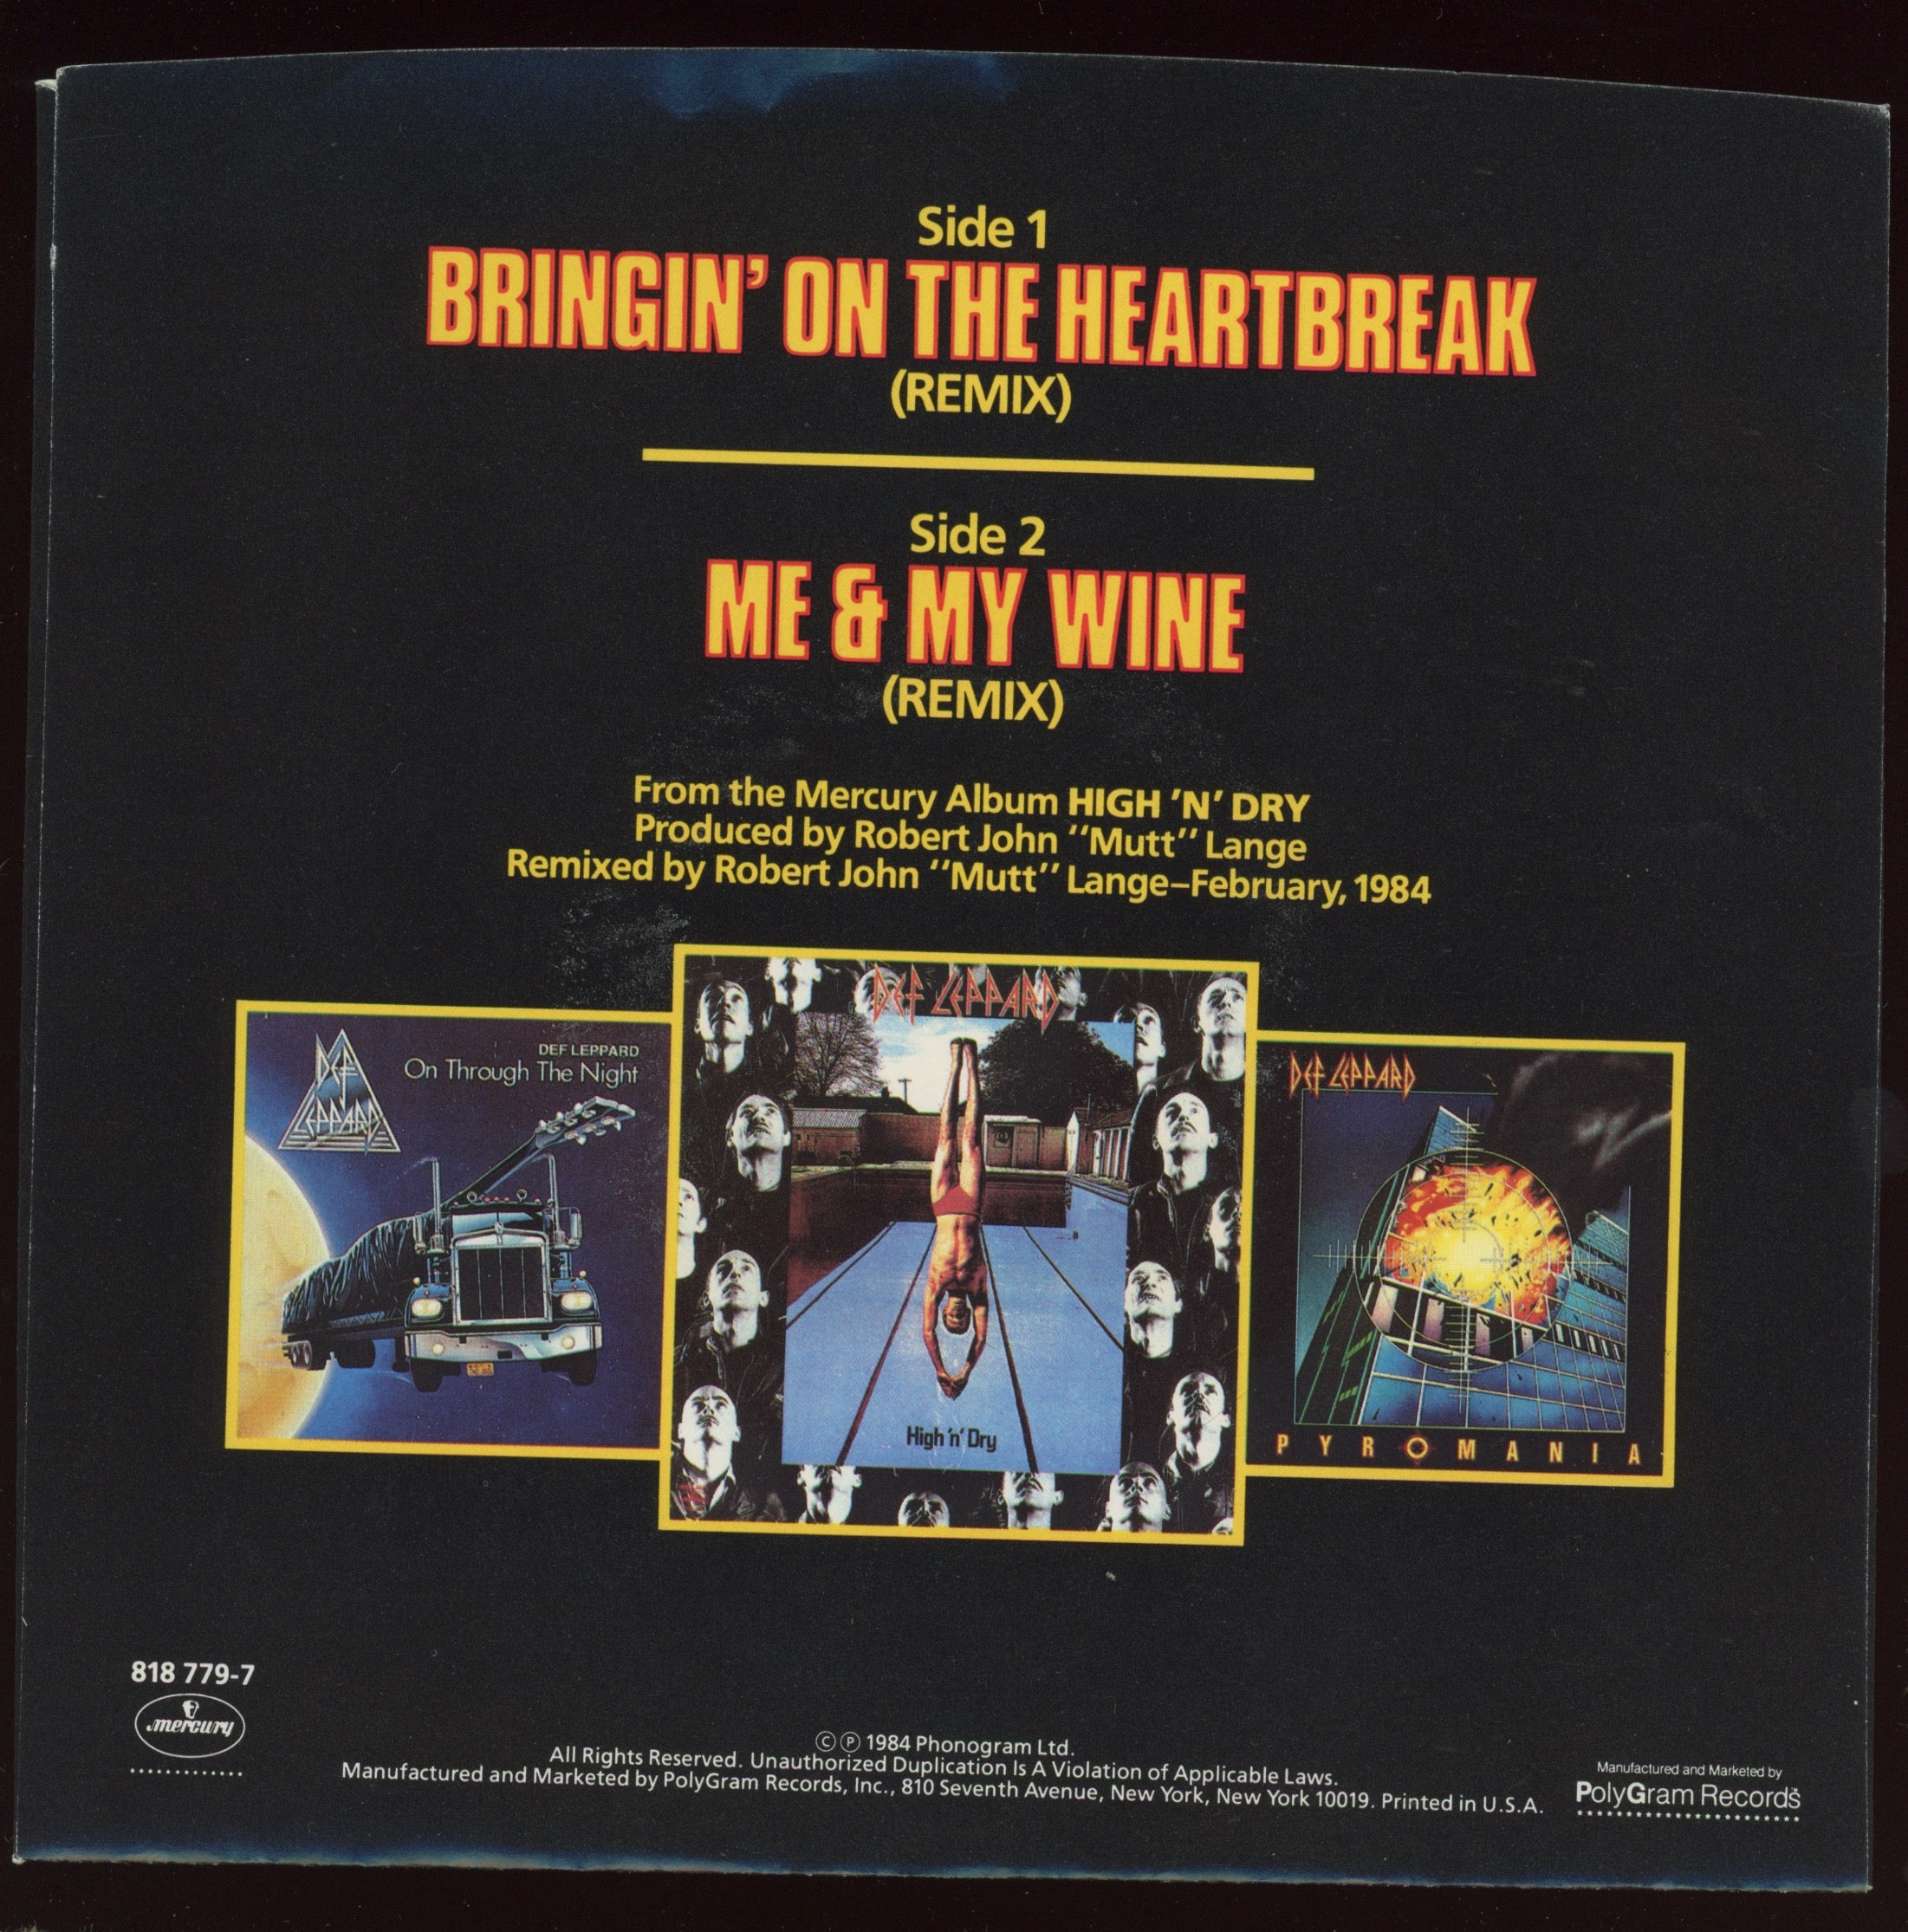 Def Leppard - Bringin' On The Heartbreak (Remix) on Mercury With Picture Sleeve